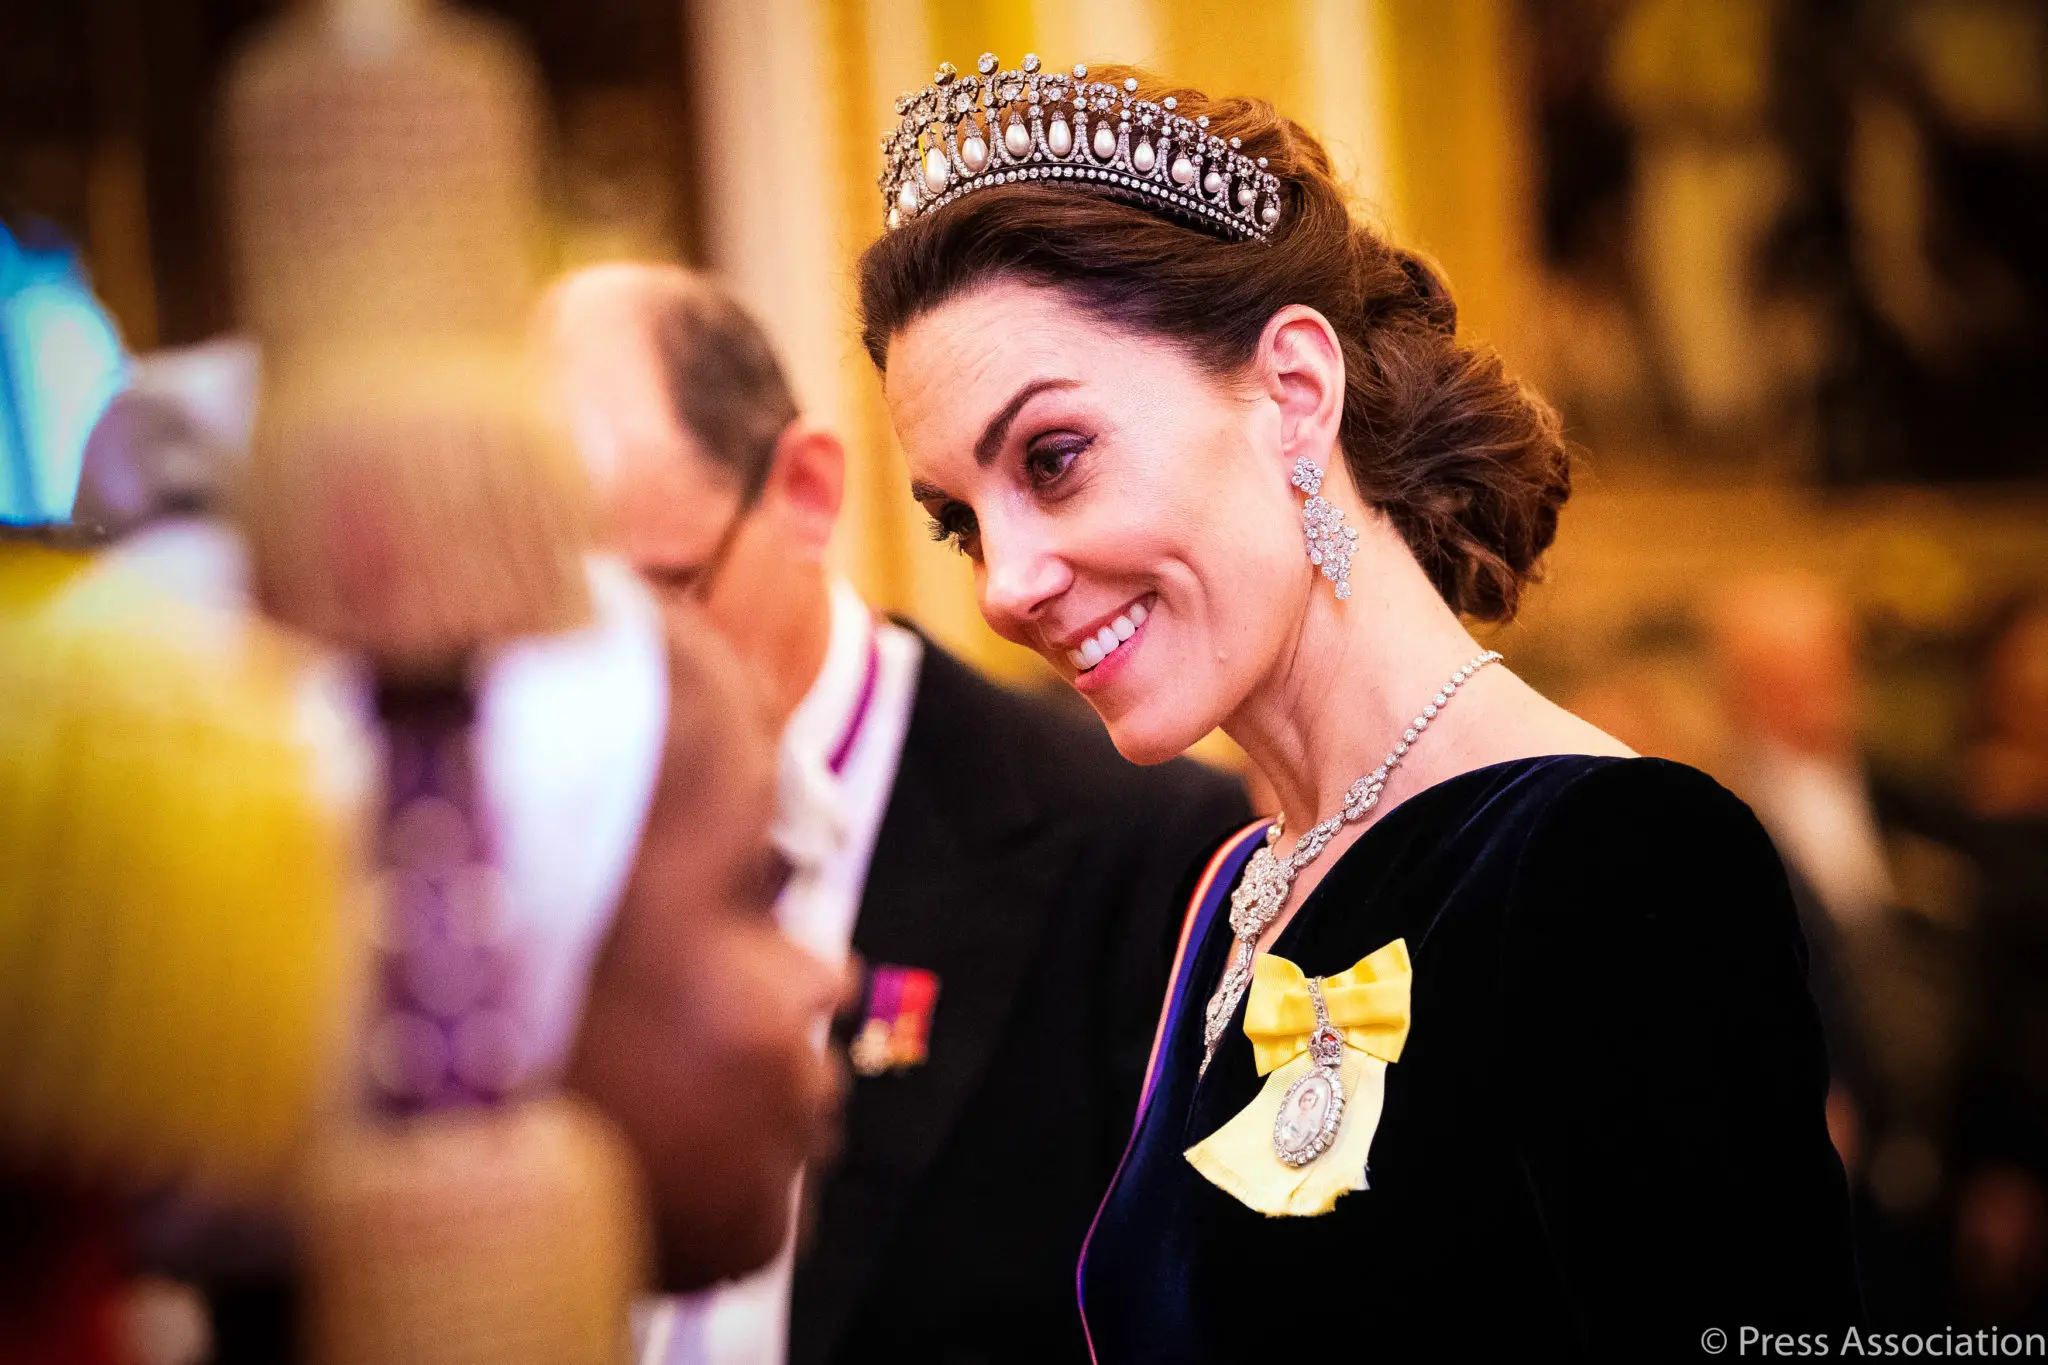 The Duchess of Cambridge in Royally Sparkling Diamonds at Diplomatic Reception 2019